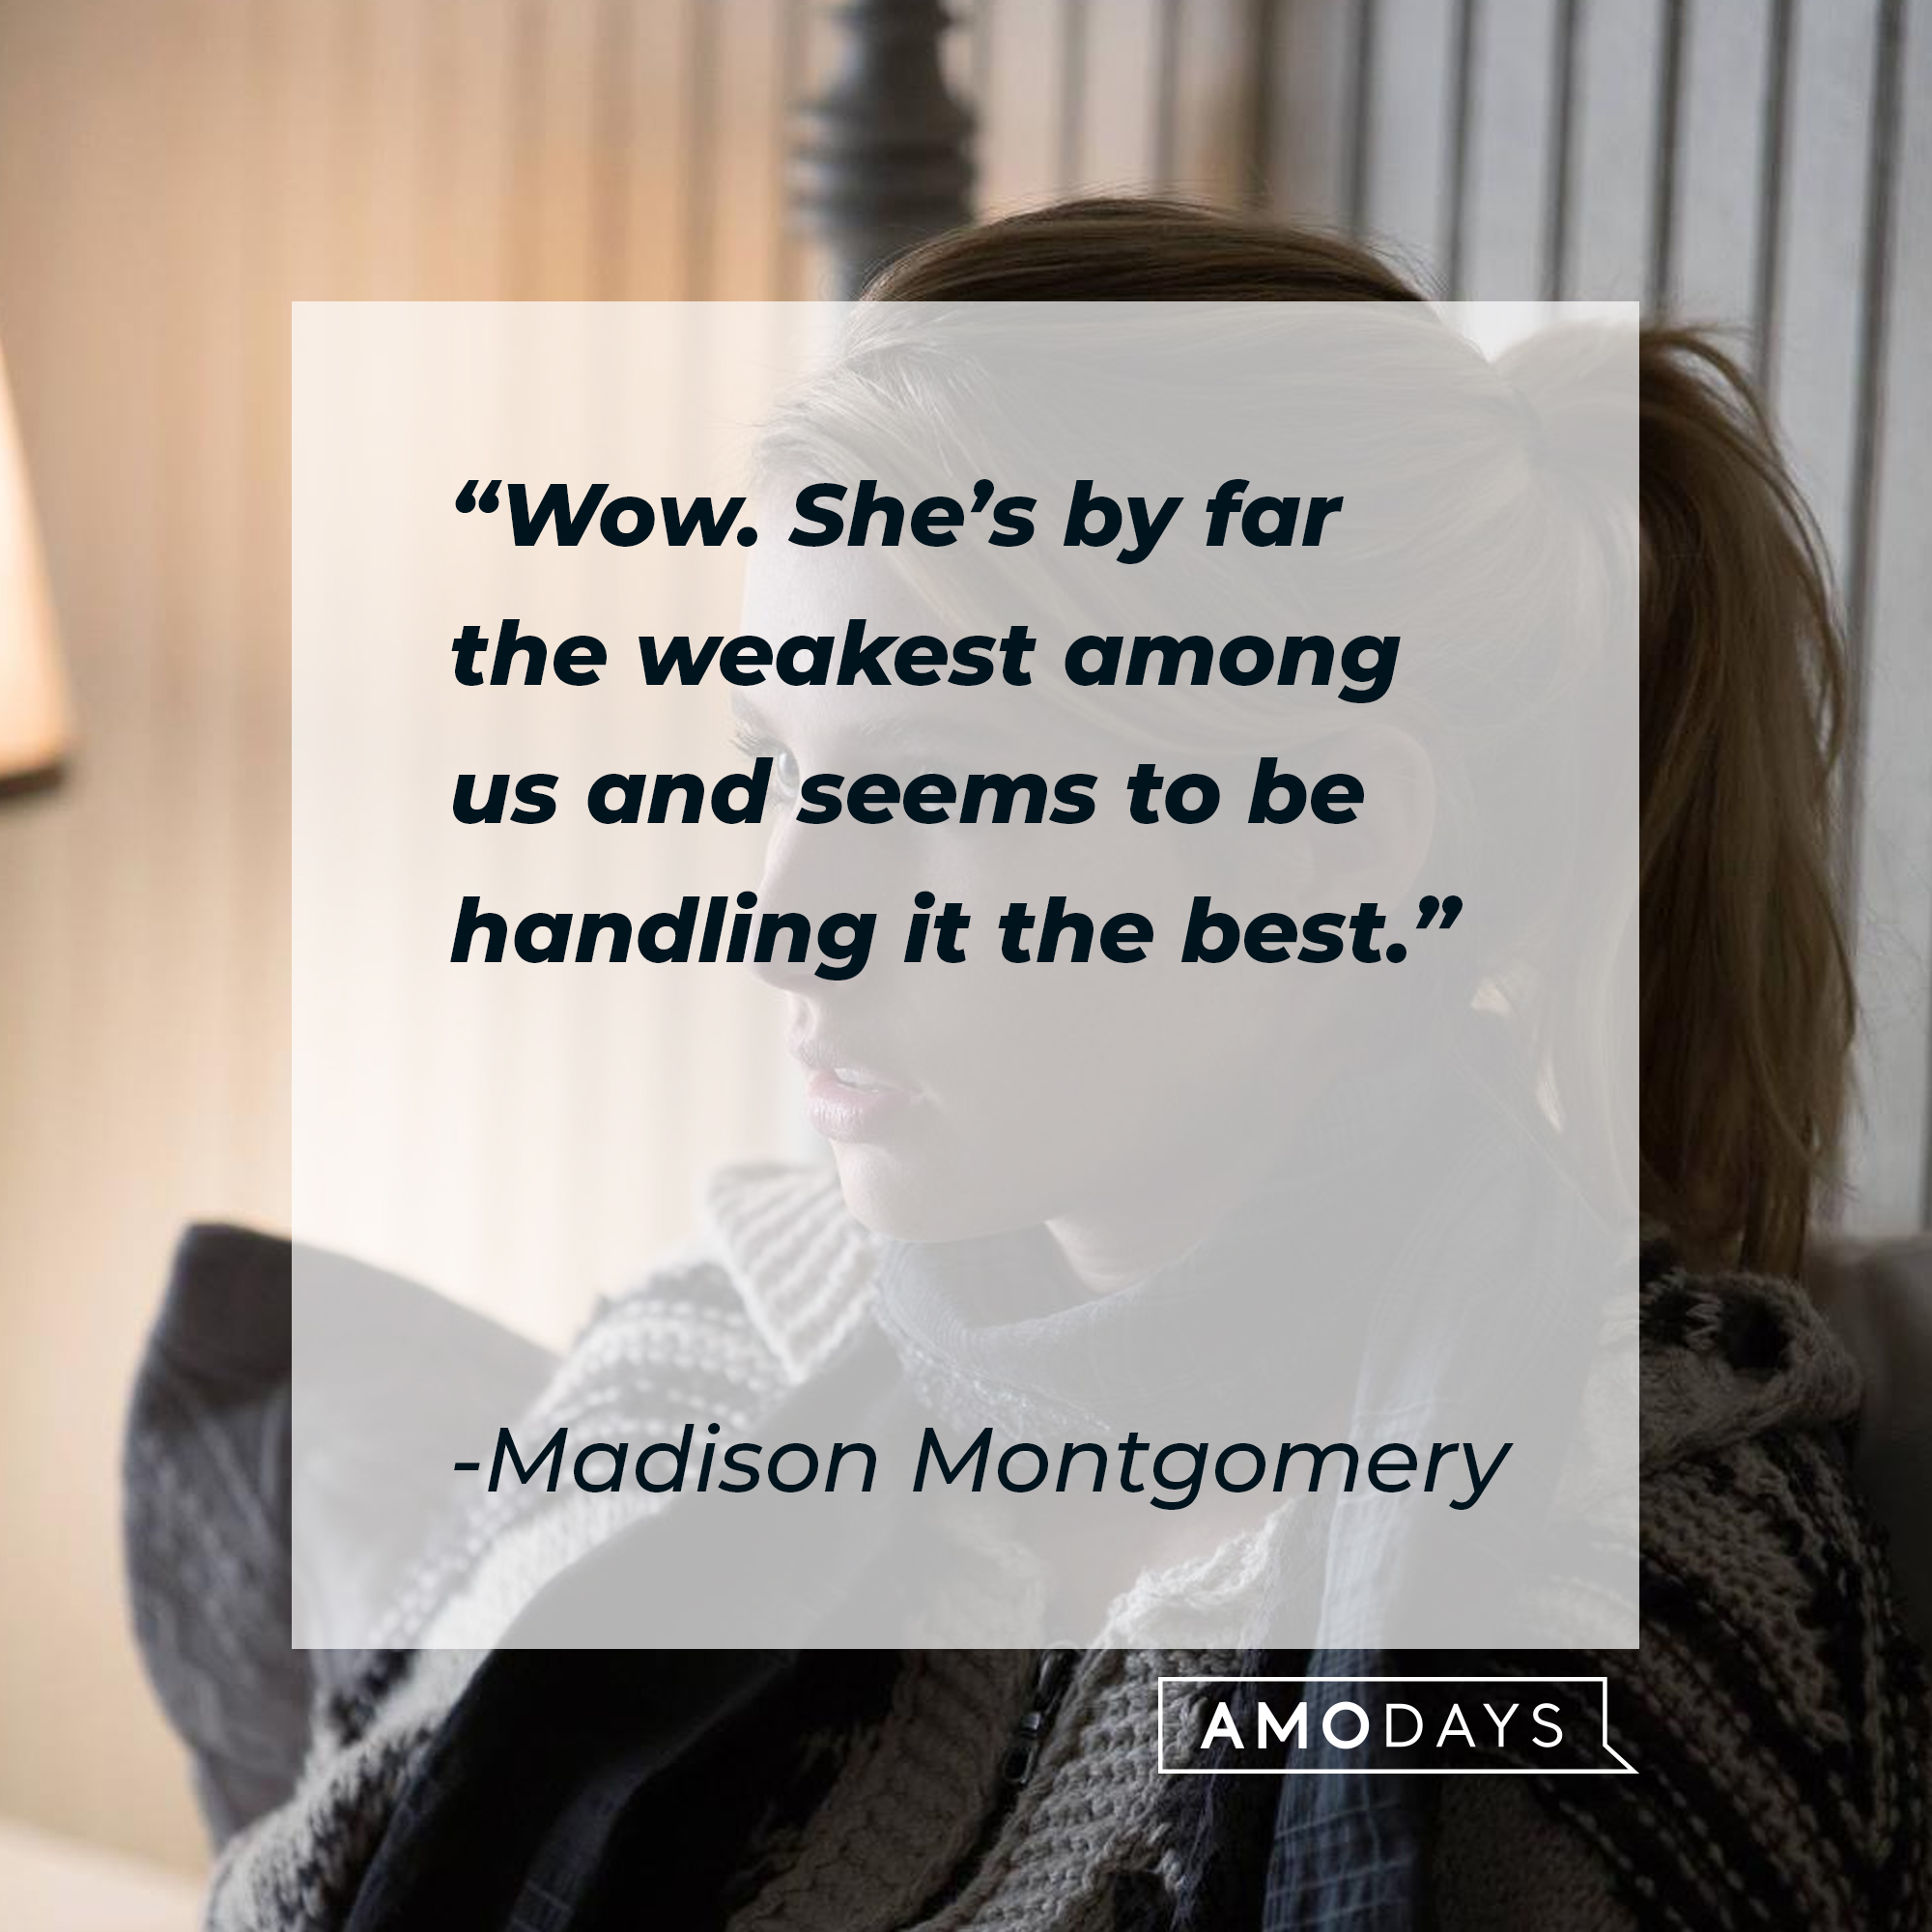 Madison's quote: “Wow. She’s by far the weakest among us and seems to be handling it the best.” | Source: facebook.com/americanhorrorstory